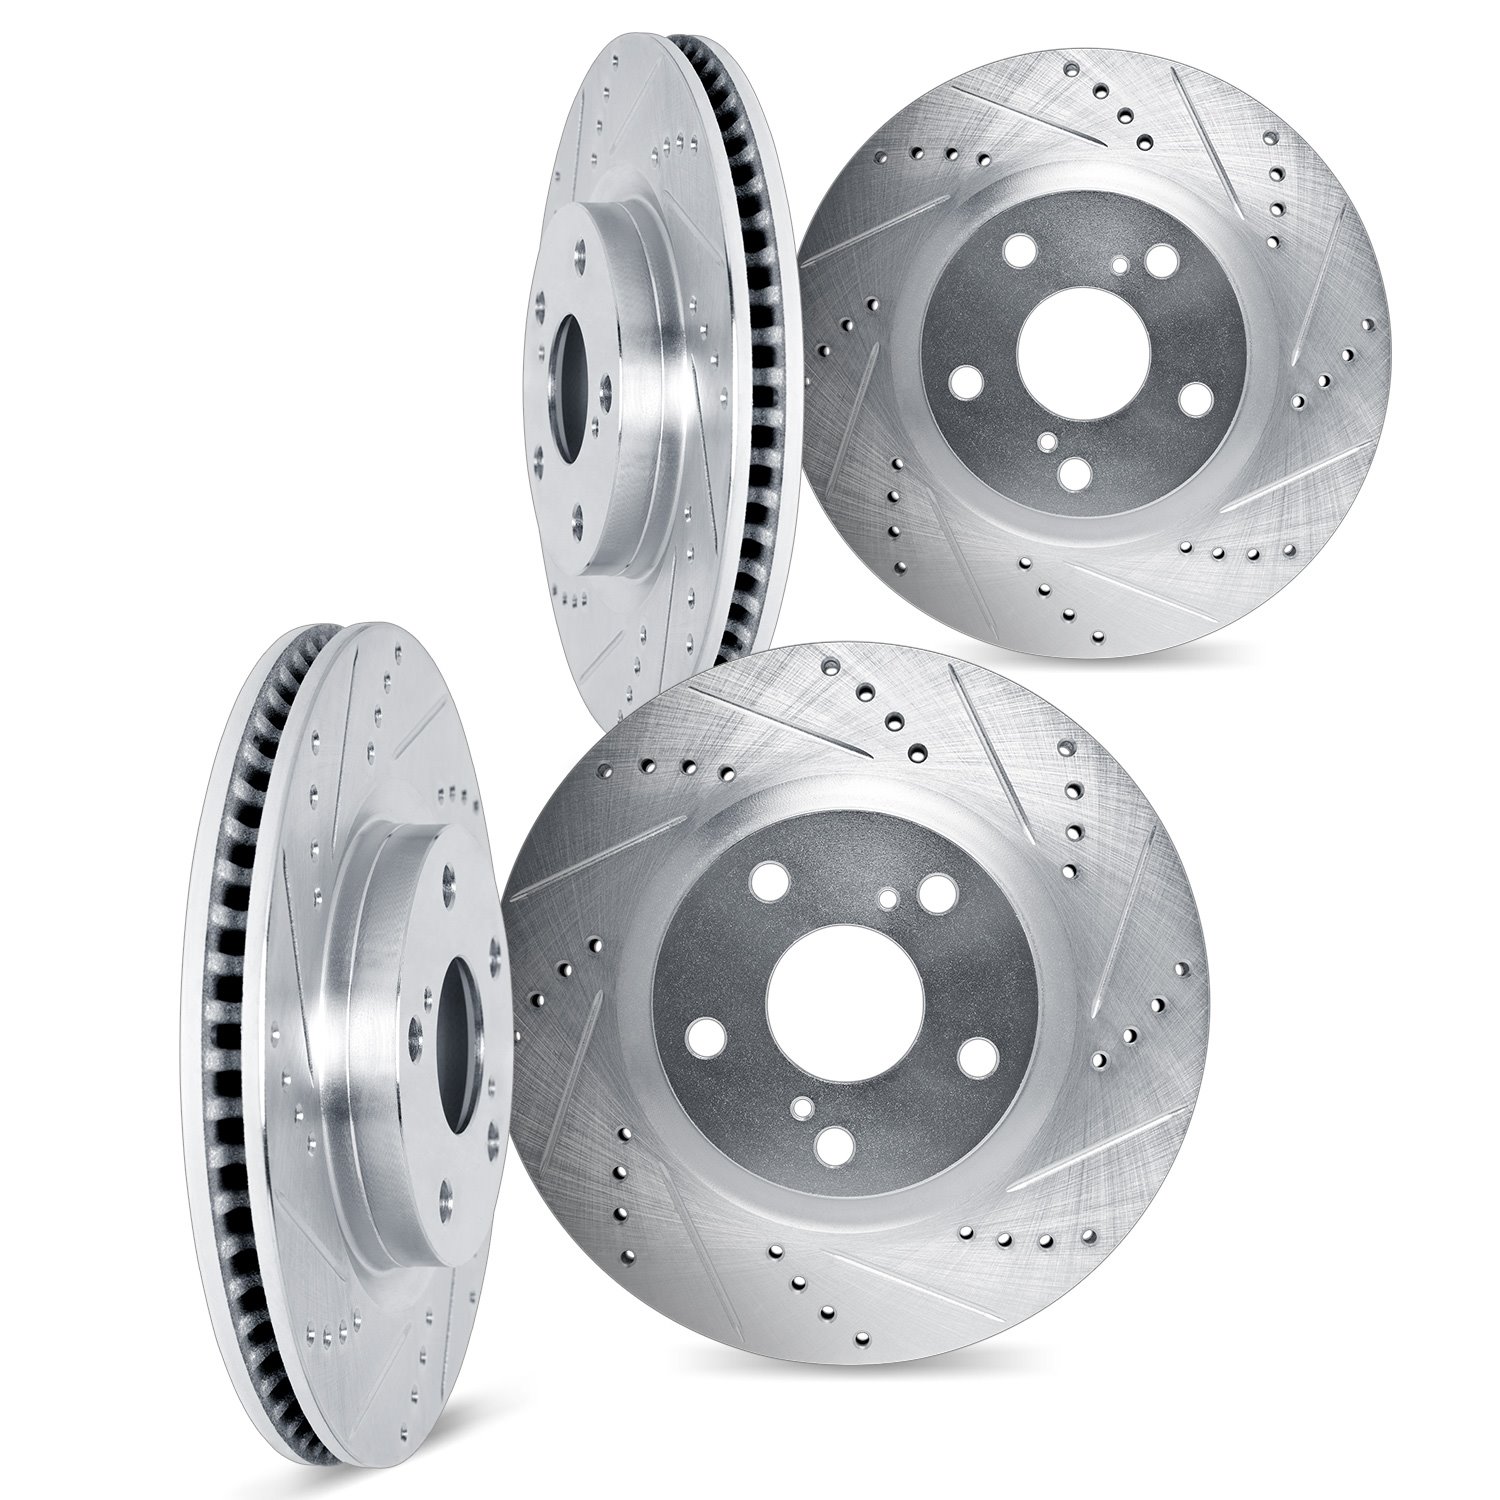 7004-31057 Drilled/Slotted Brake Rotors [Silver], Fits Select BMW, Position: Front and Rear